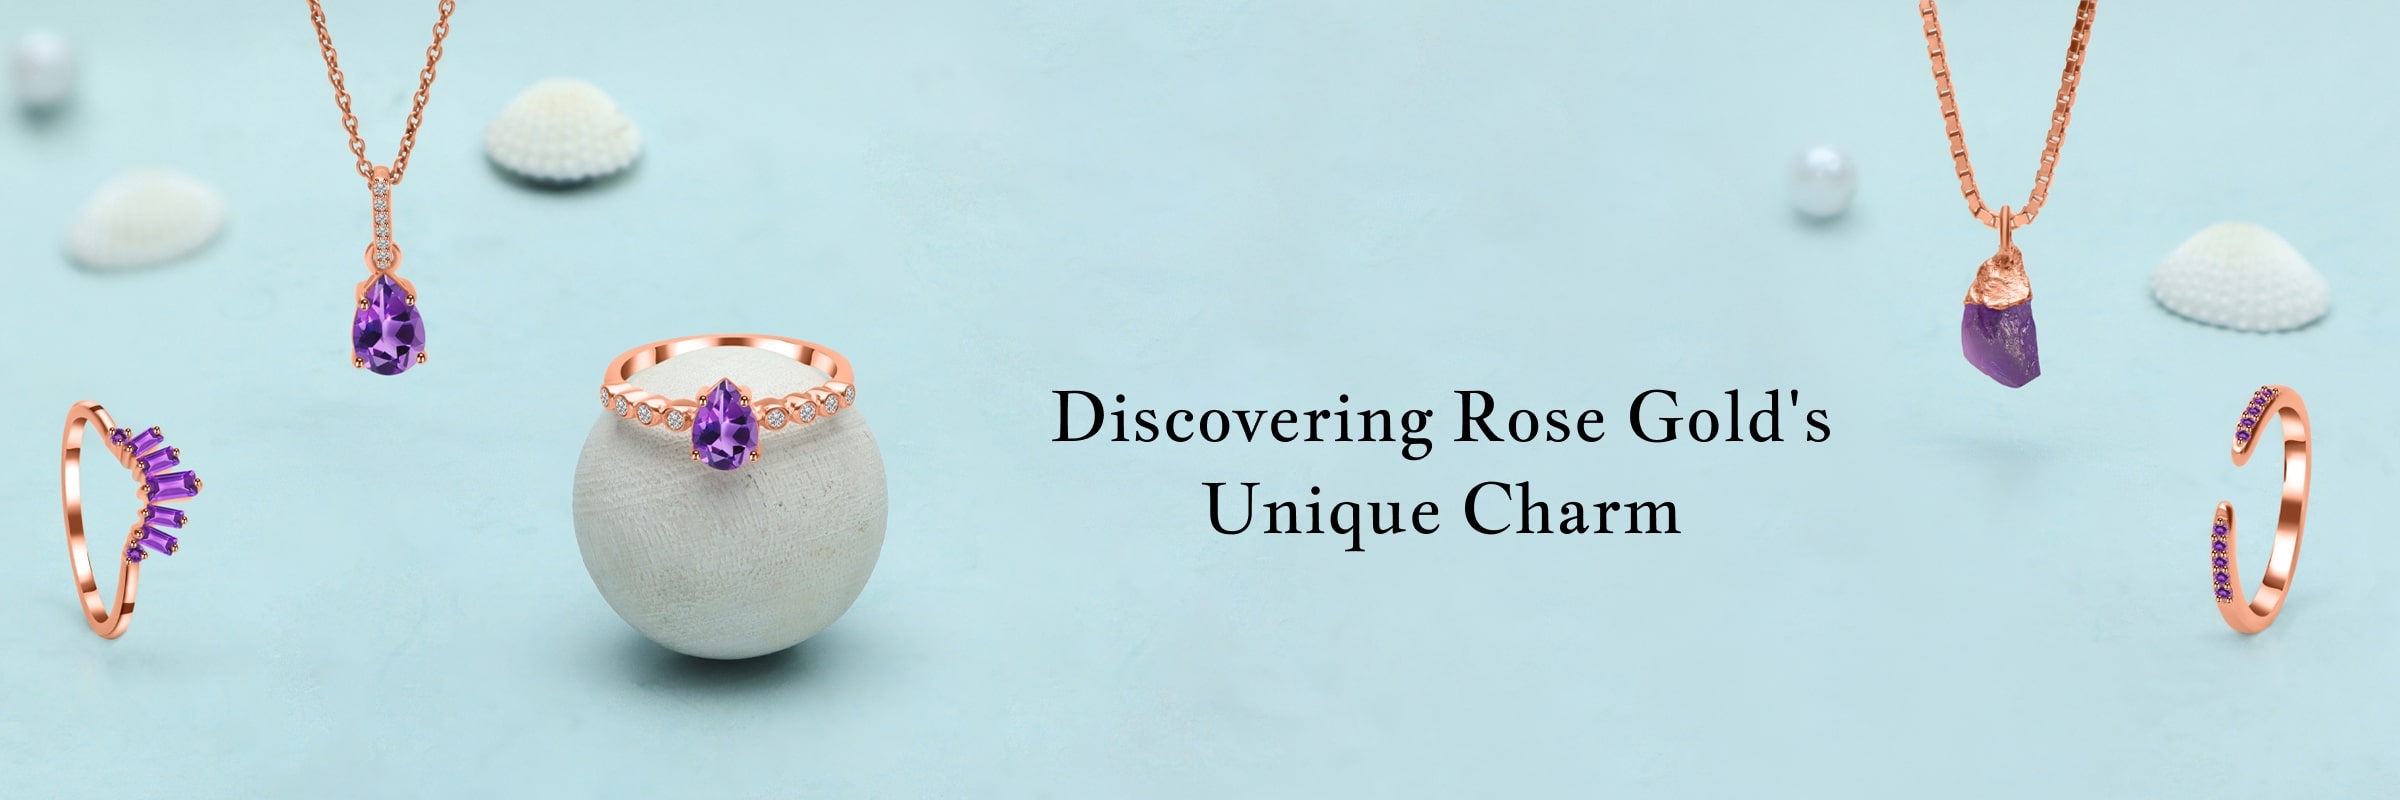 Getting To Know Rose Gold What Makes Rose Gold, Rose?